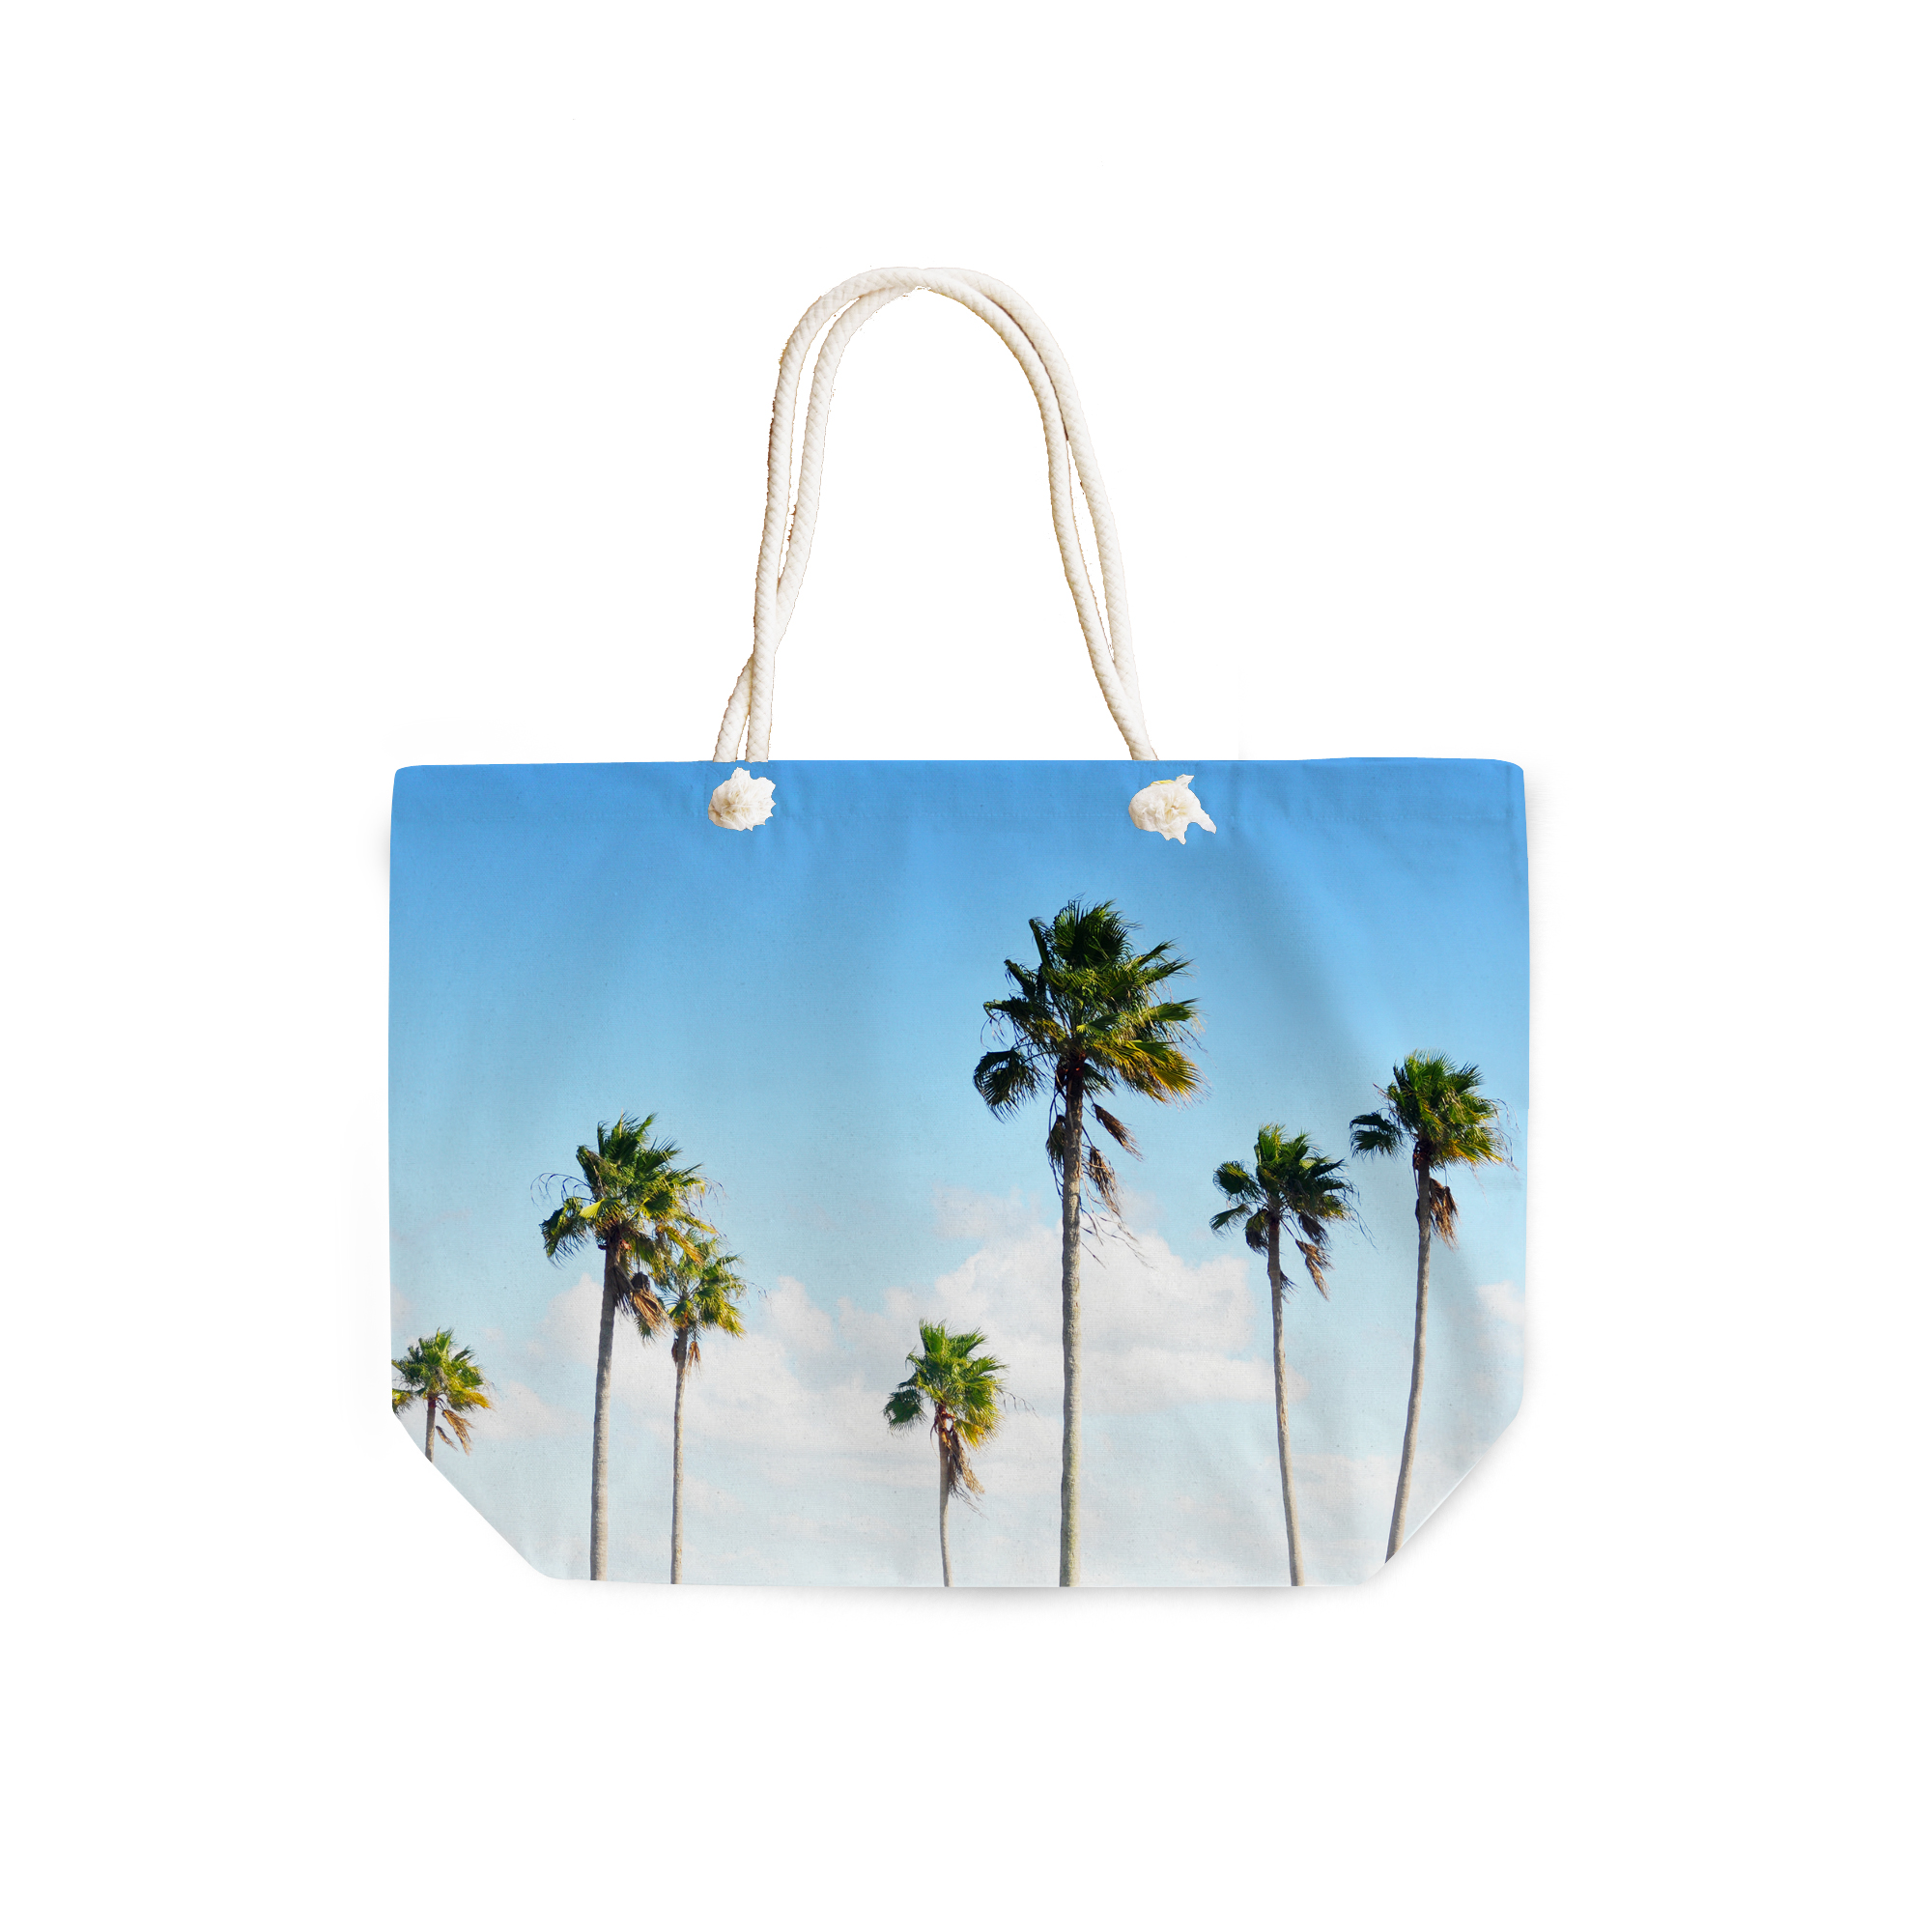 All Weekender Totes — Beach Surf Decor by Nature | City Co.